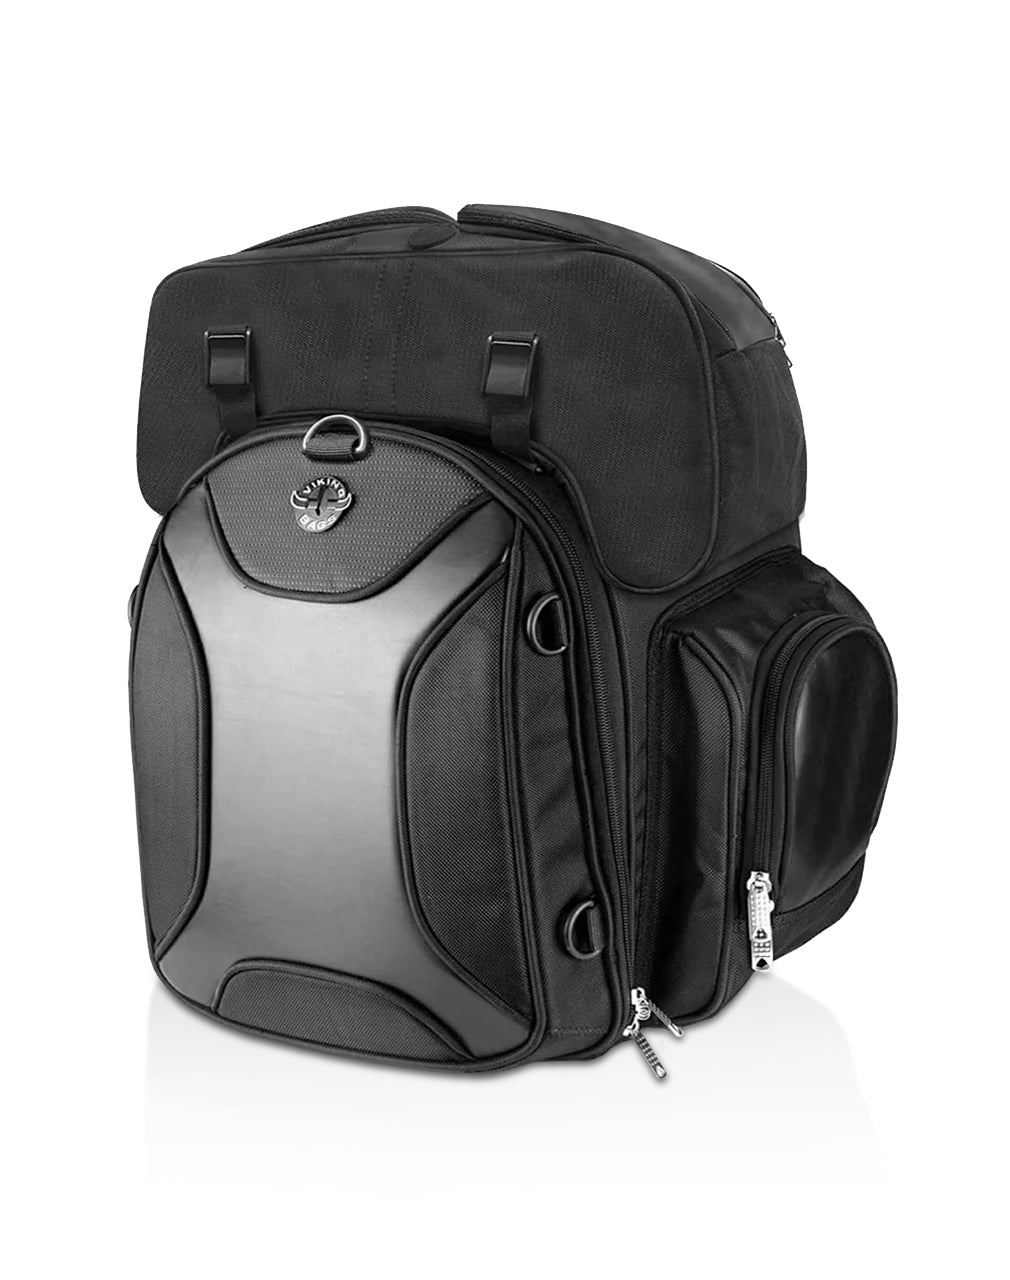 34L - Dagr Extra Large Hysoung Motorcycle Tail Bag